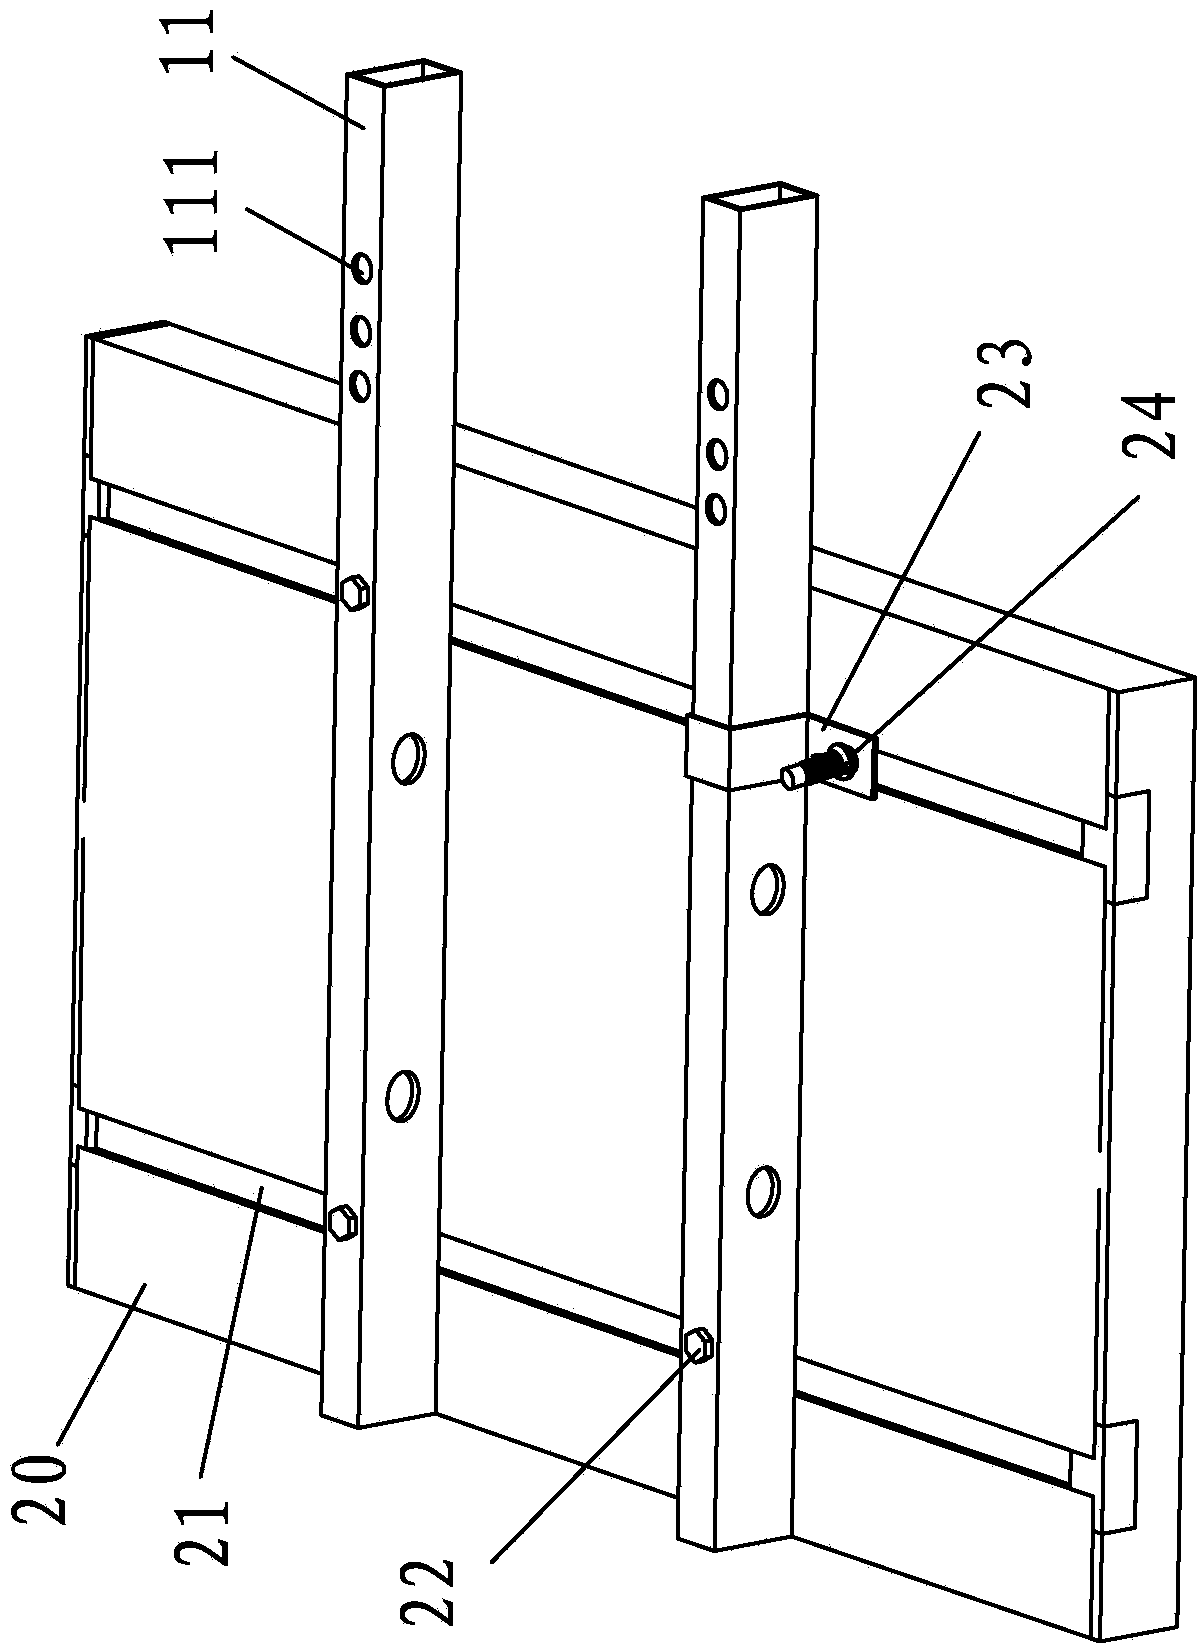 Construction method for column mold composed of concrete formworks